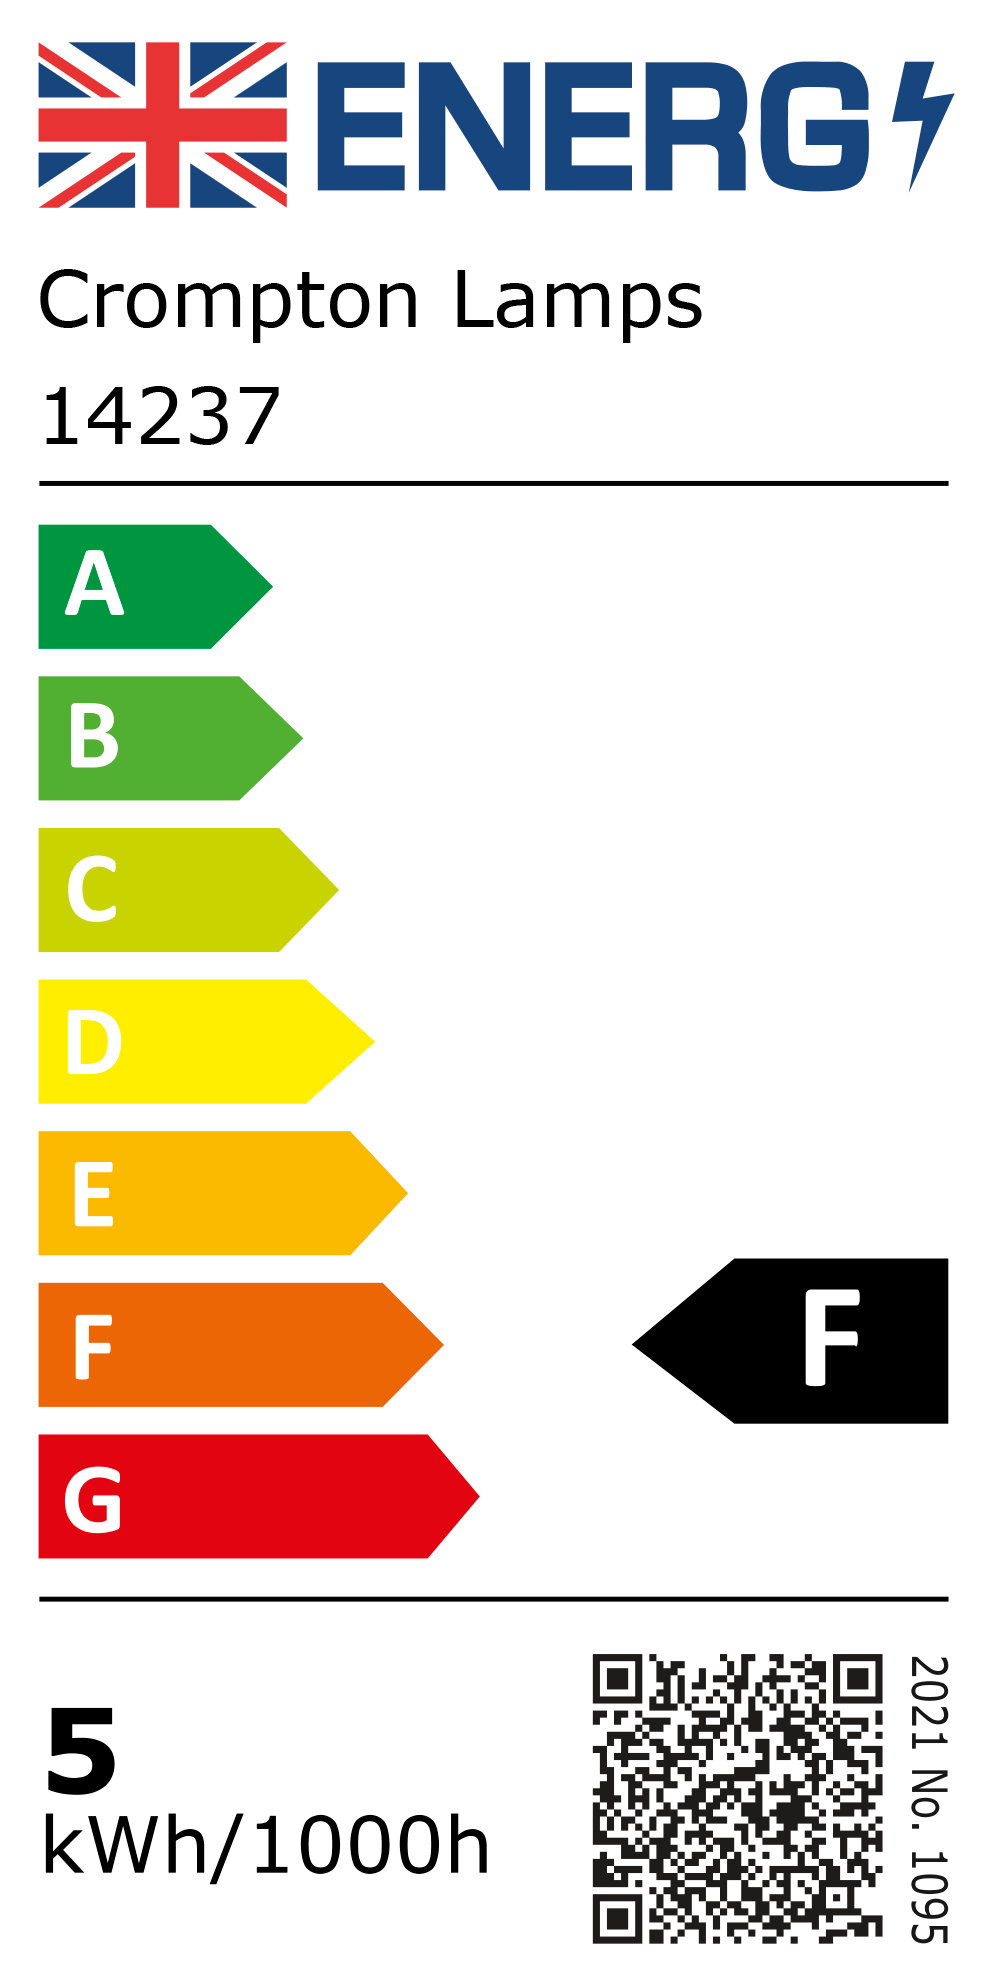 New 2021 Energy Rating Label: Stock Code 14237